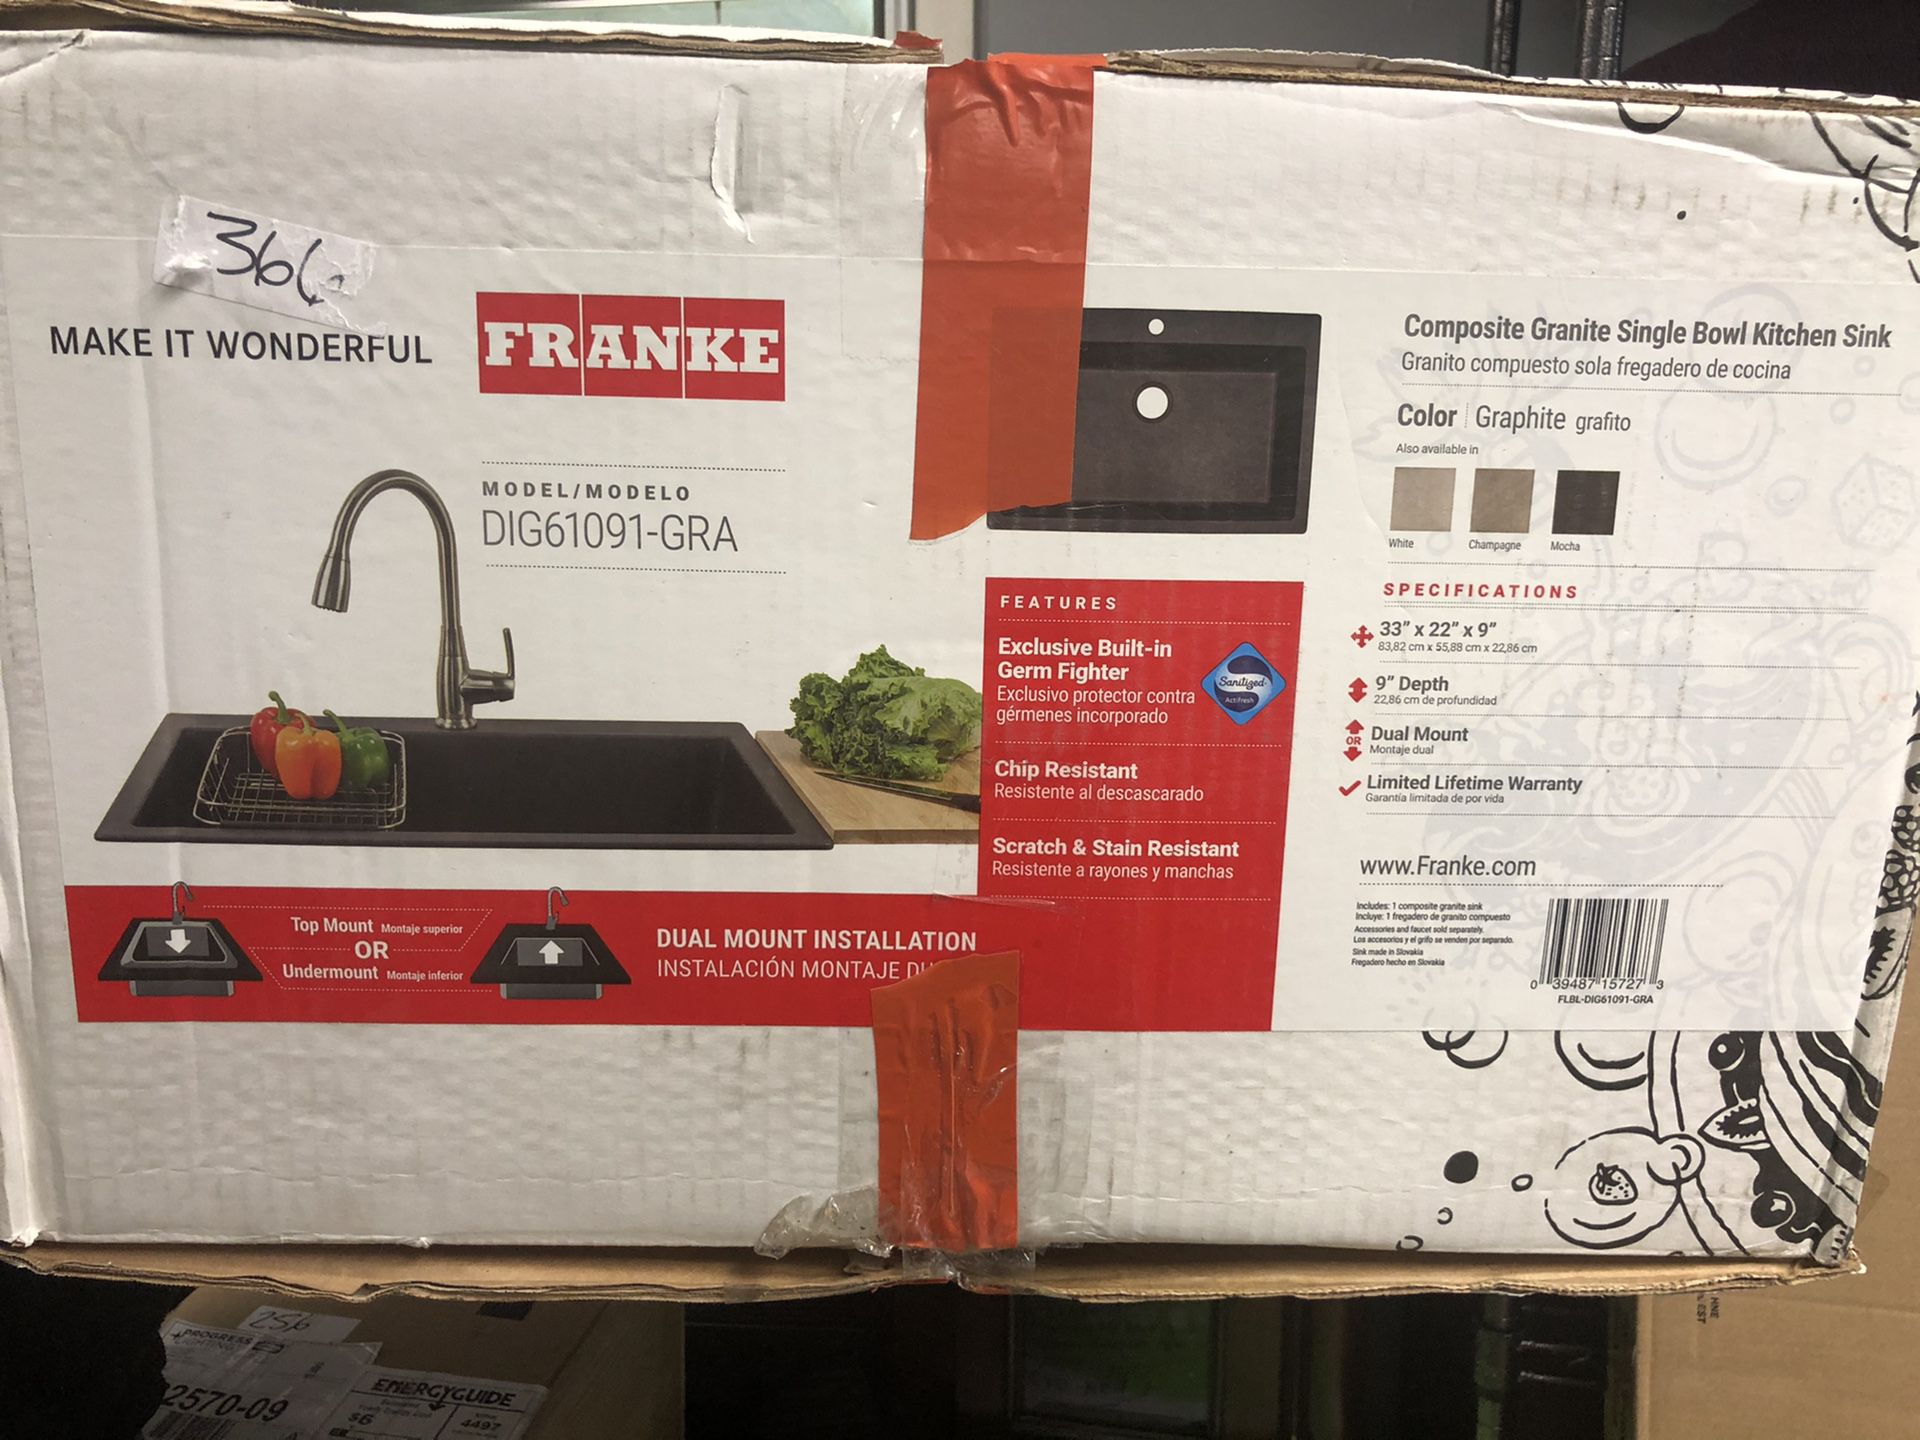 Brand new Frank composite granite single bowl kitchen sink 33”x 22” 9” . Dual mount explosive built in germ fighter , ship resistant , scratch and st